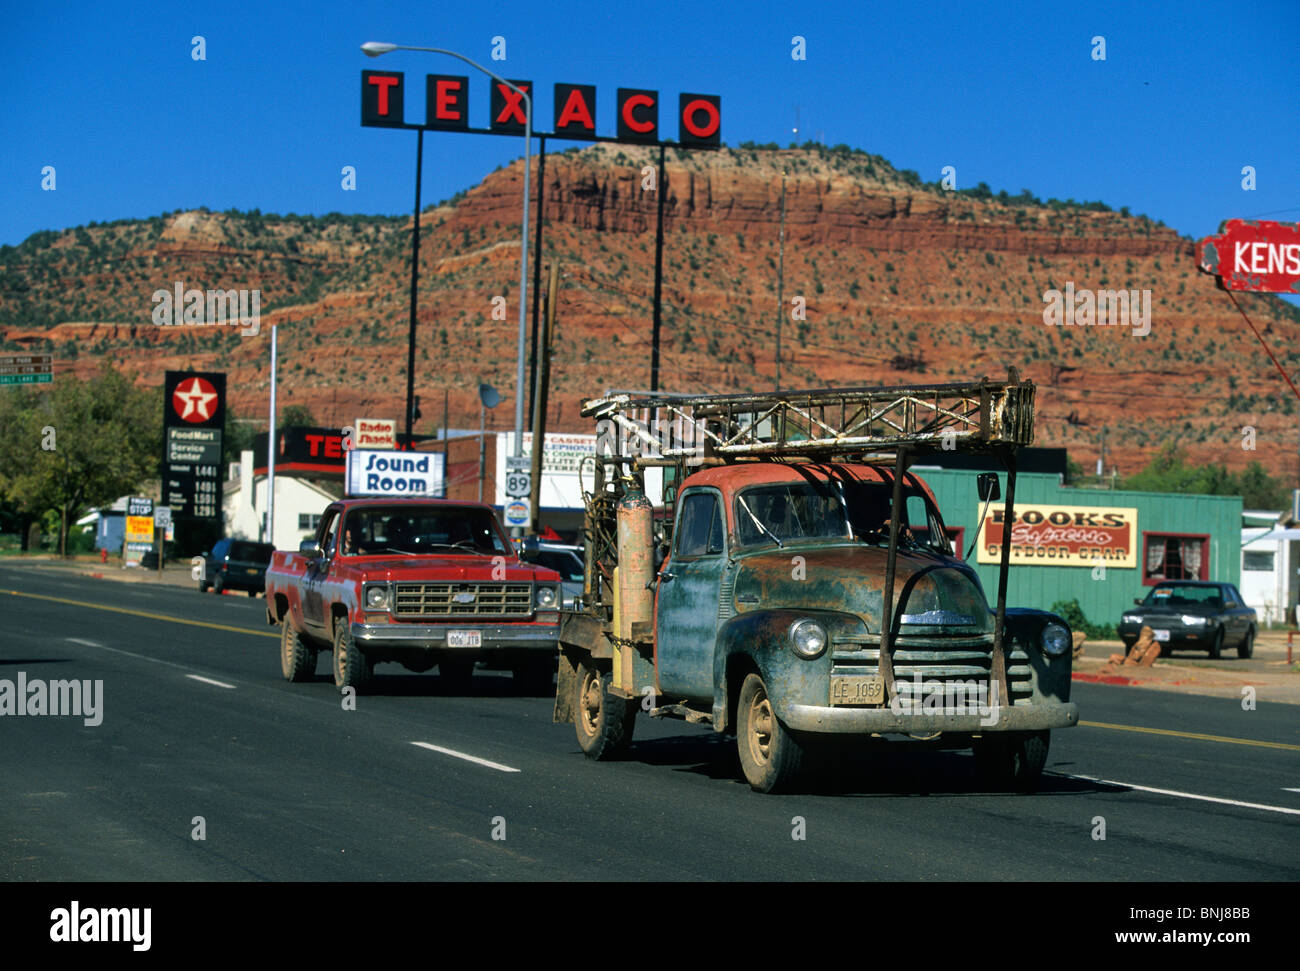 USA Utah town city cars automobiles Classic car gas station Kanab North America United States of America landscape scenery Stock Photo